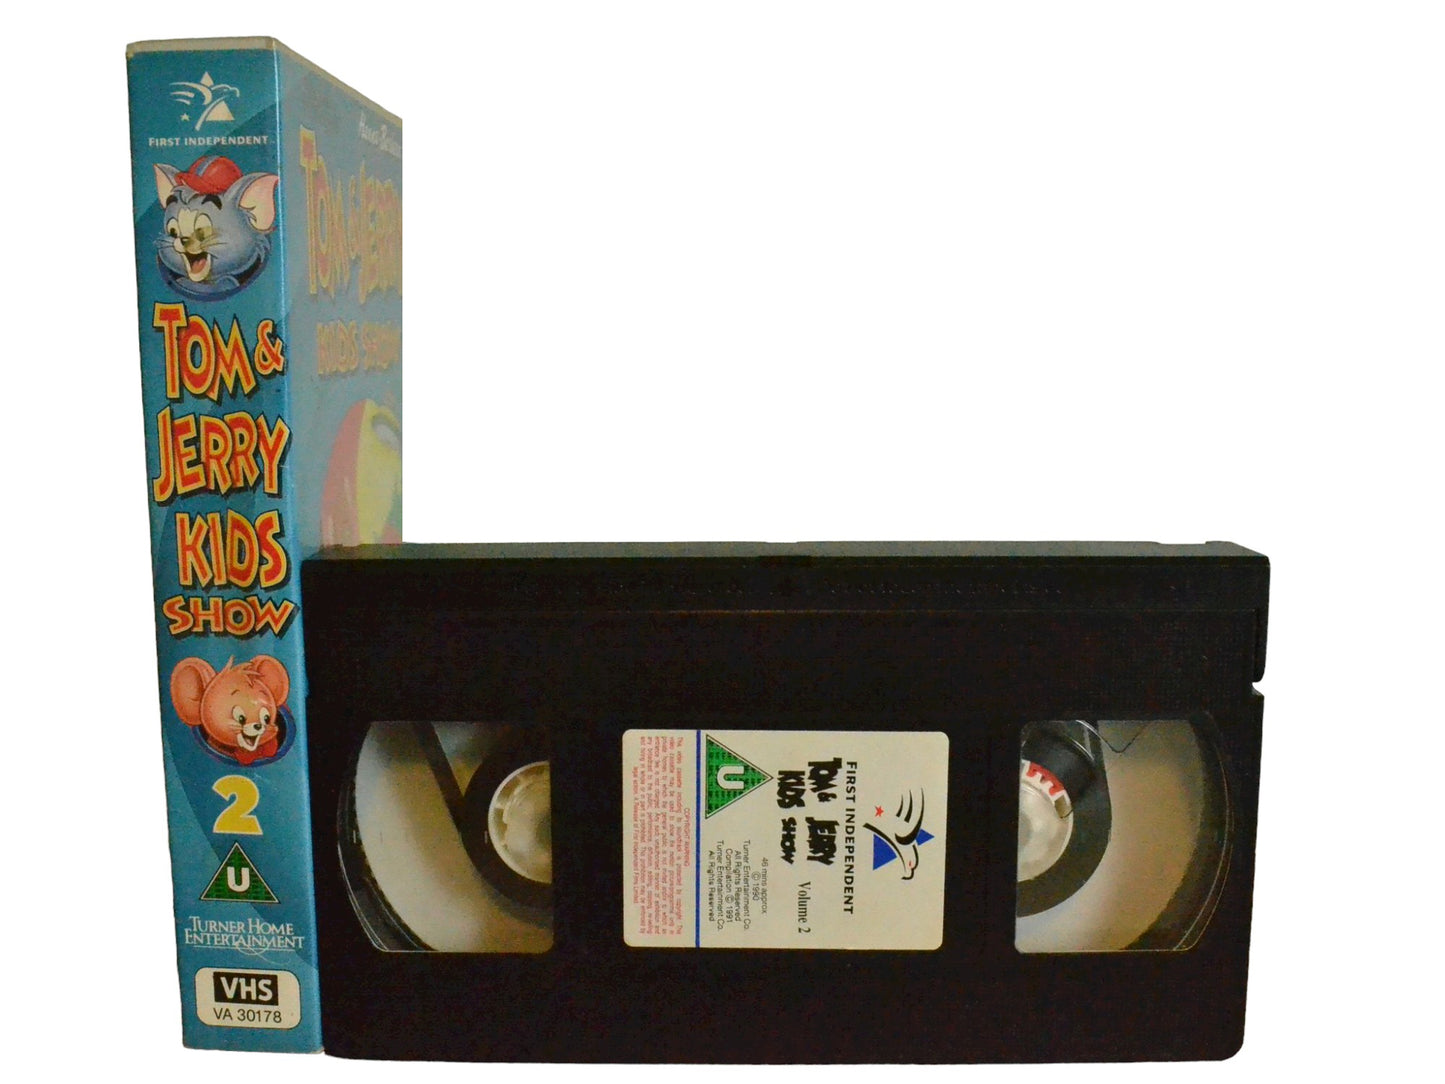 Tom and Jerry Kids Show - Outer Sapce Rover - Frank Welker - First Independent - Childrens - PAL - VHS-